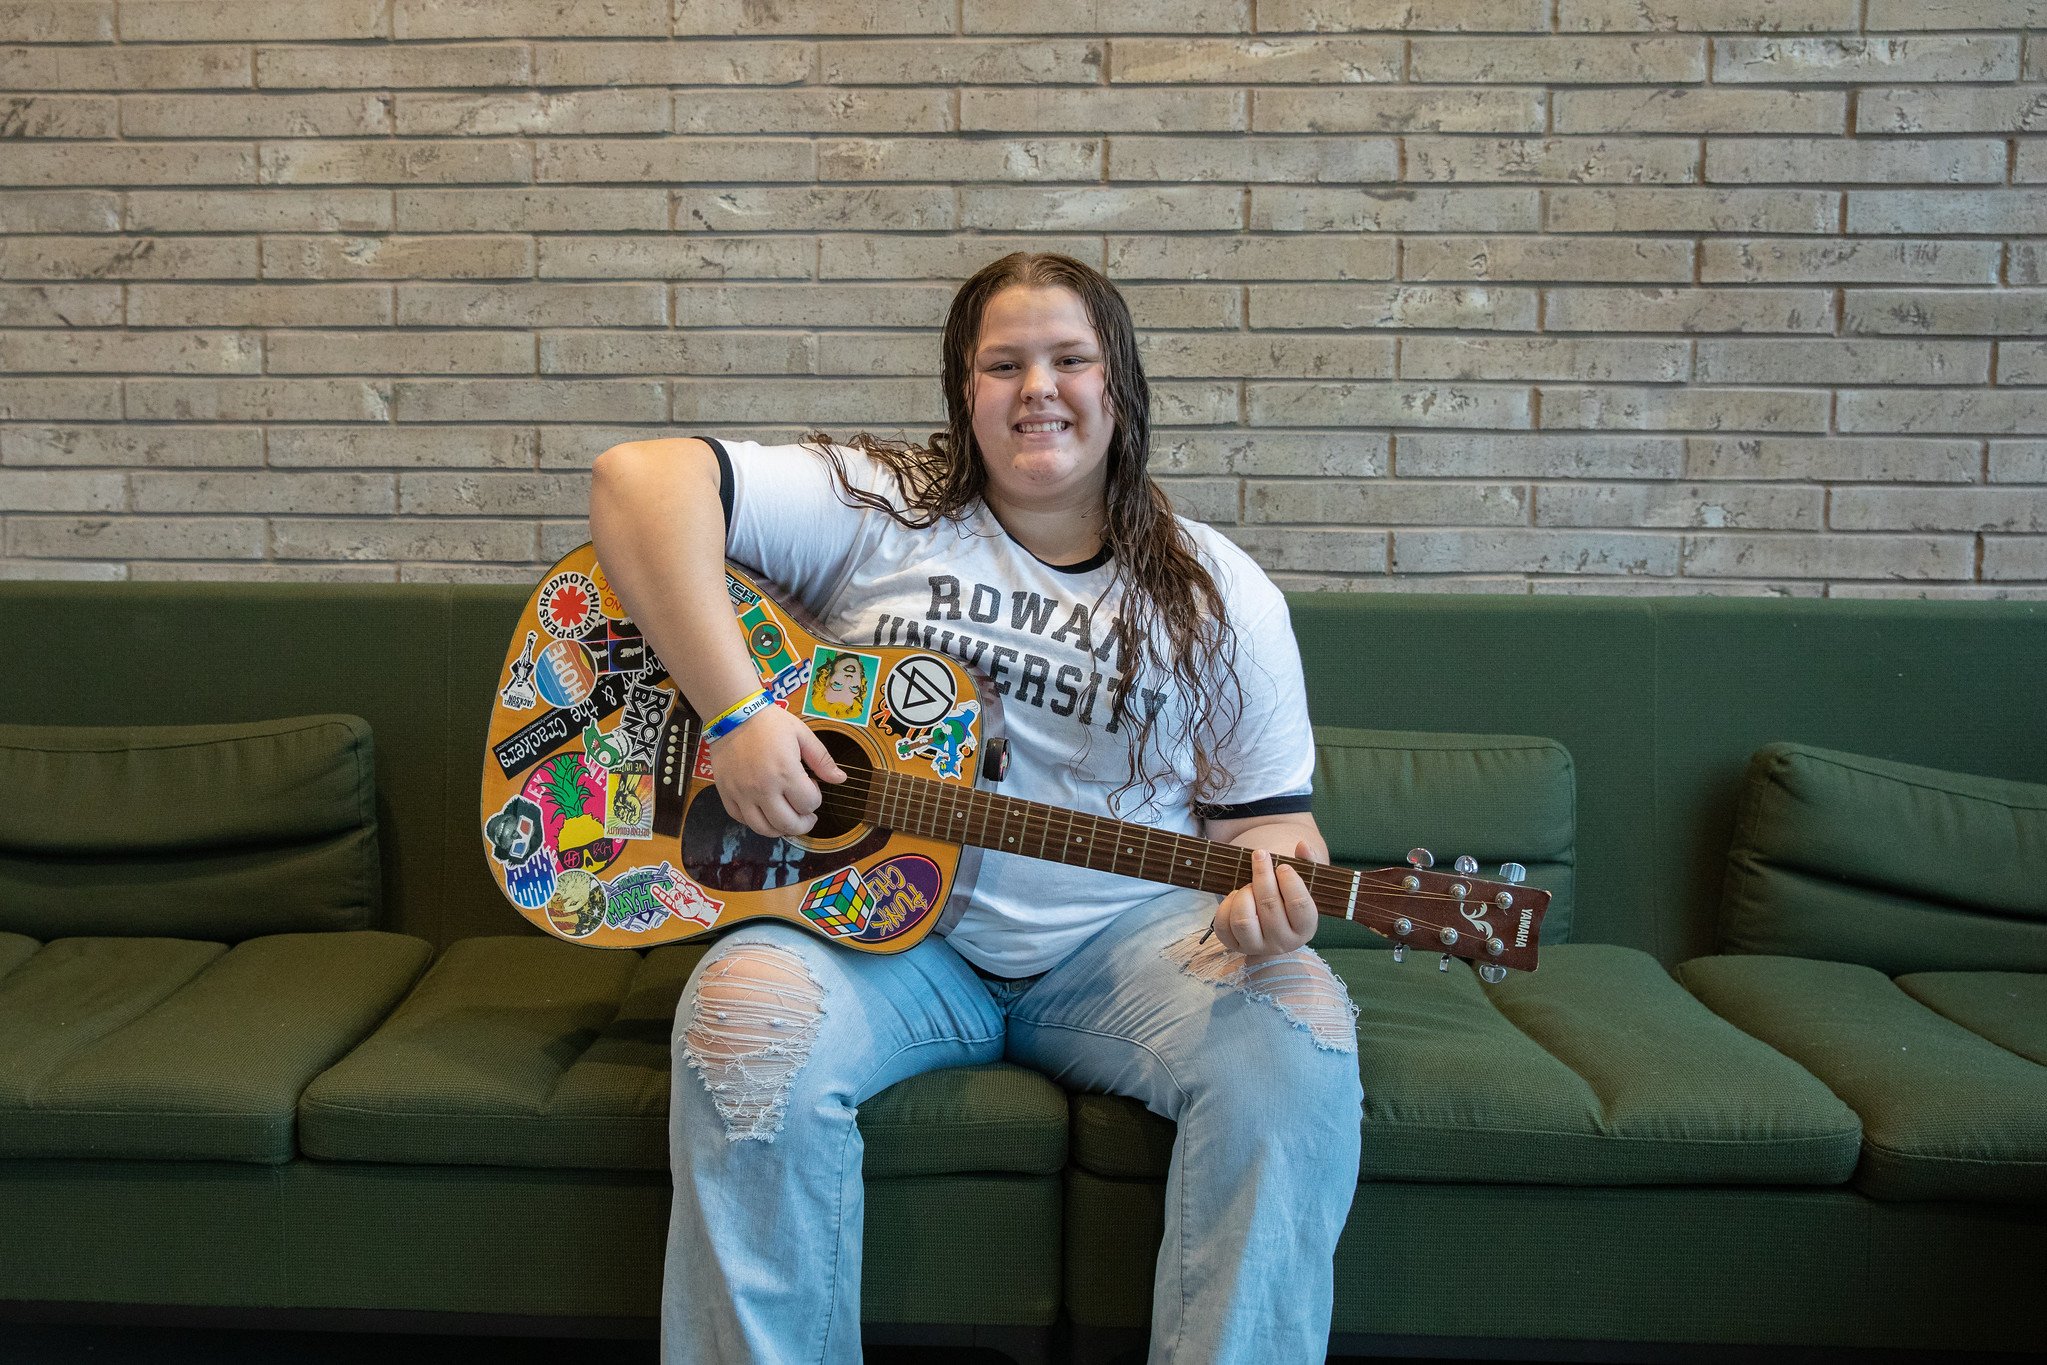 Rowan University student Laynie poses for the camera while holding a guitar. 